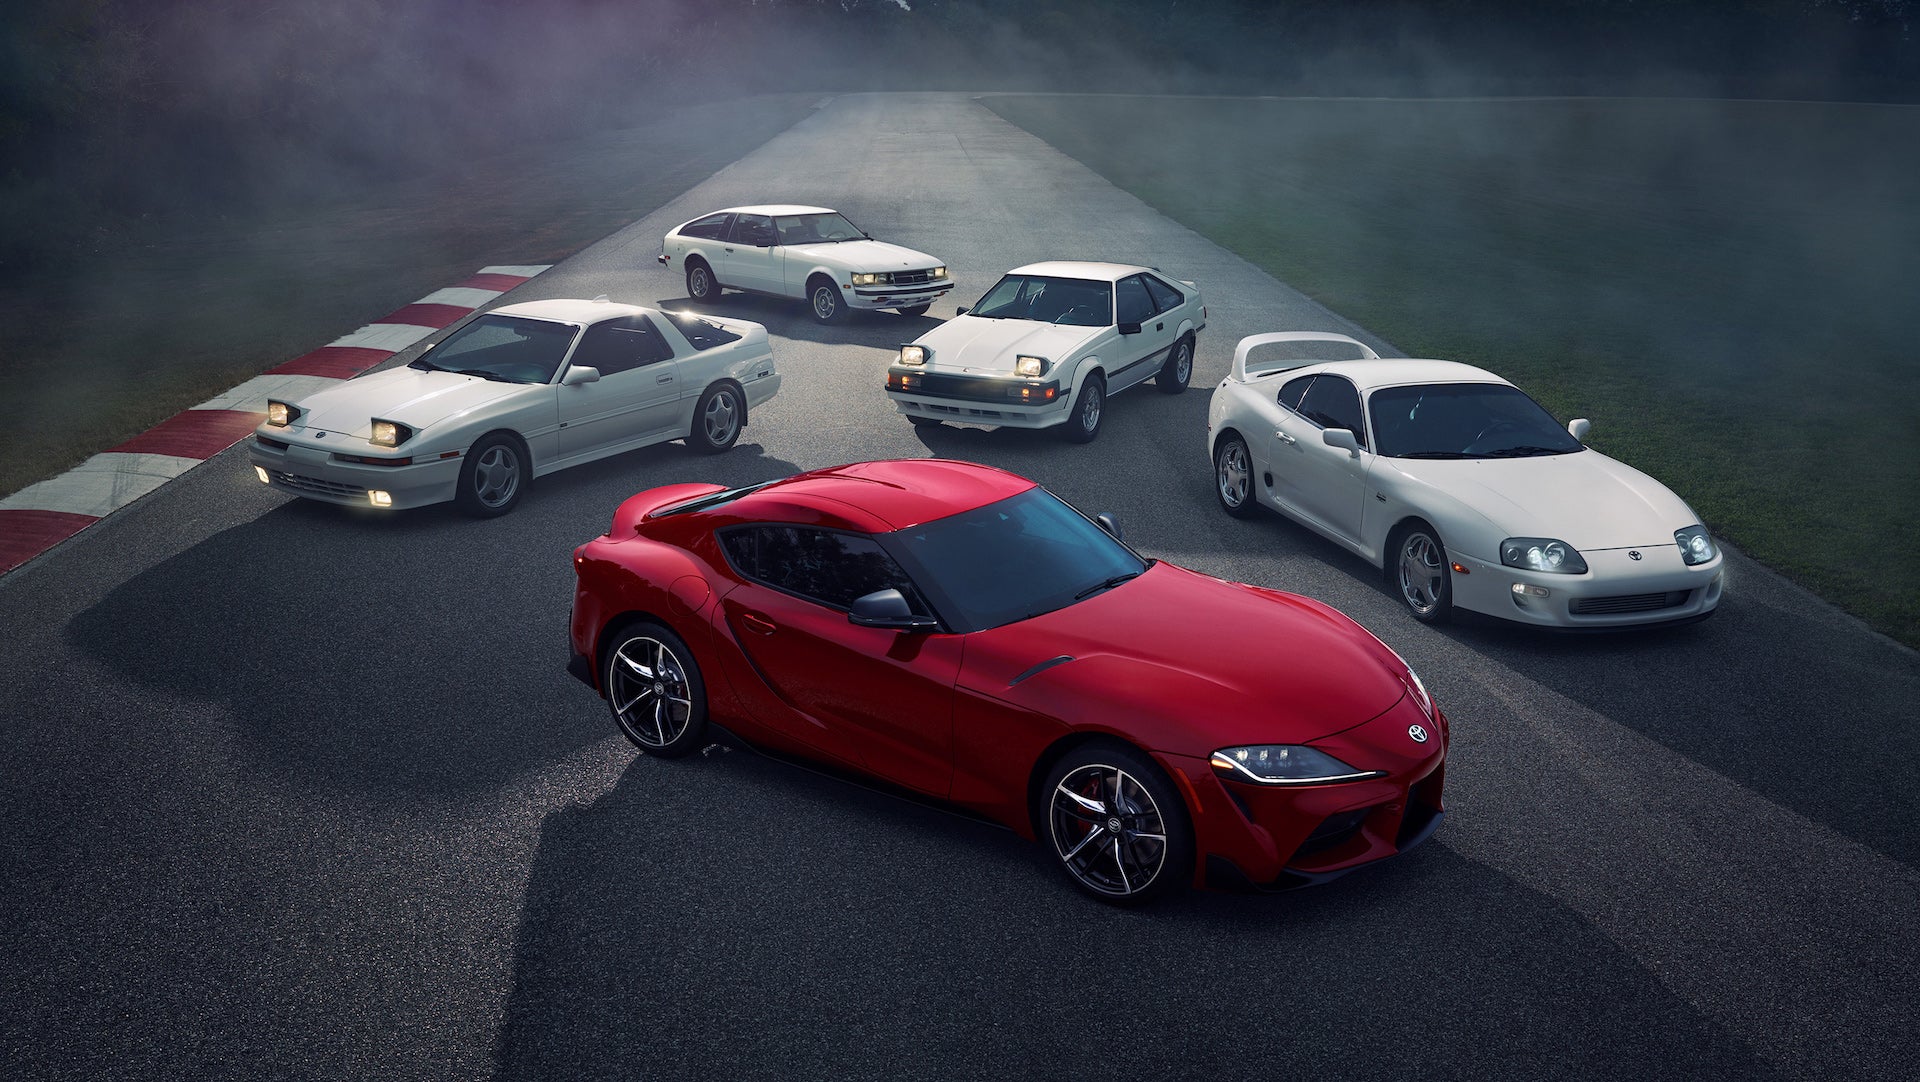 2020 Toyota Supra: After Many Leaks, This Is Finally It